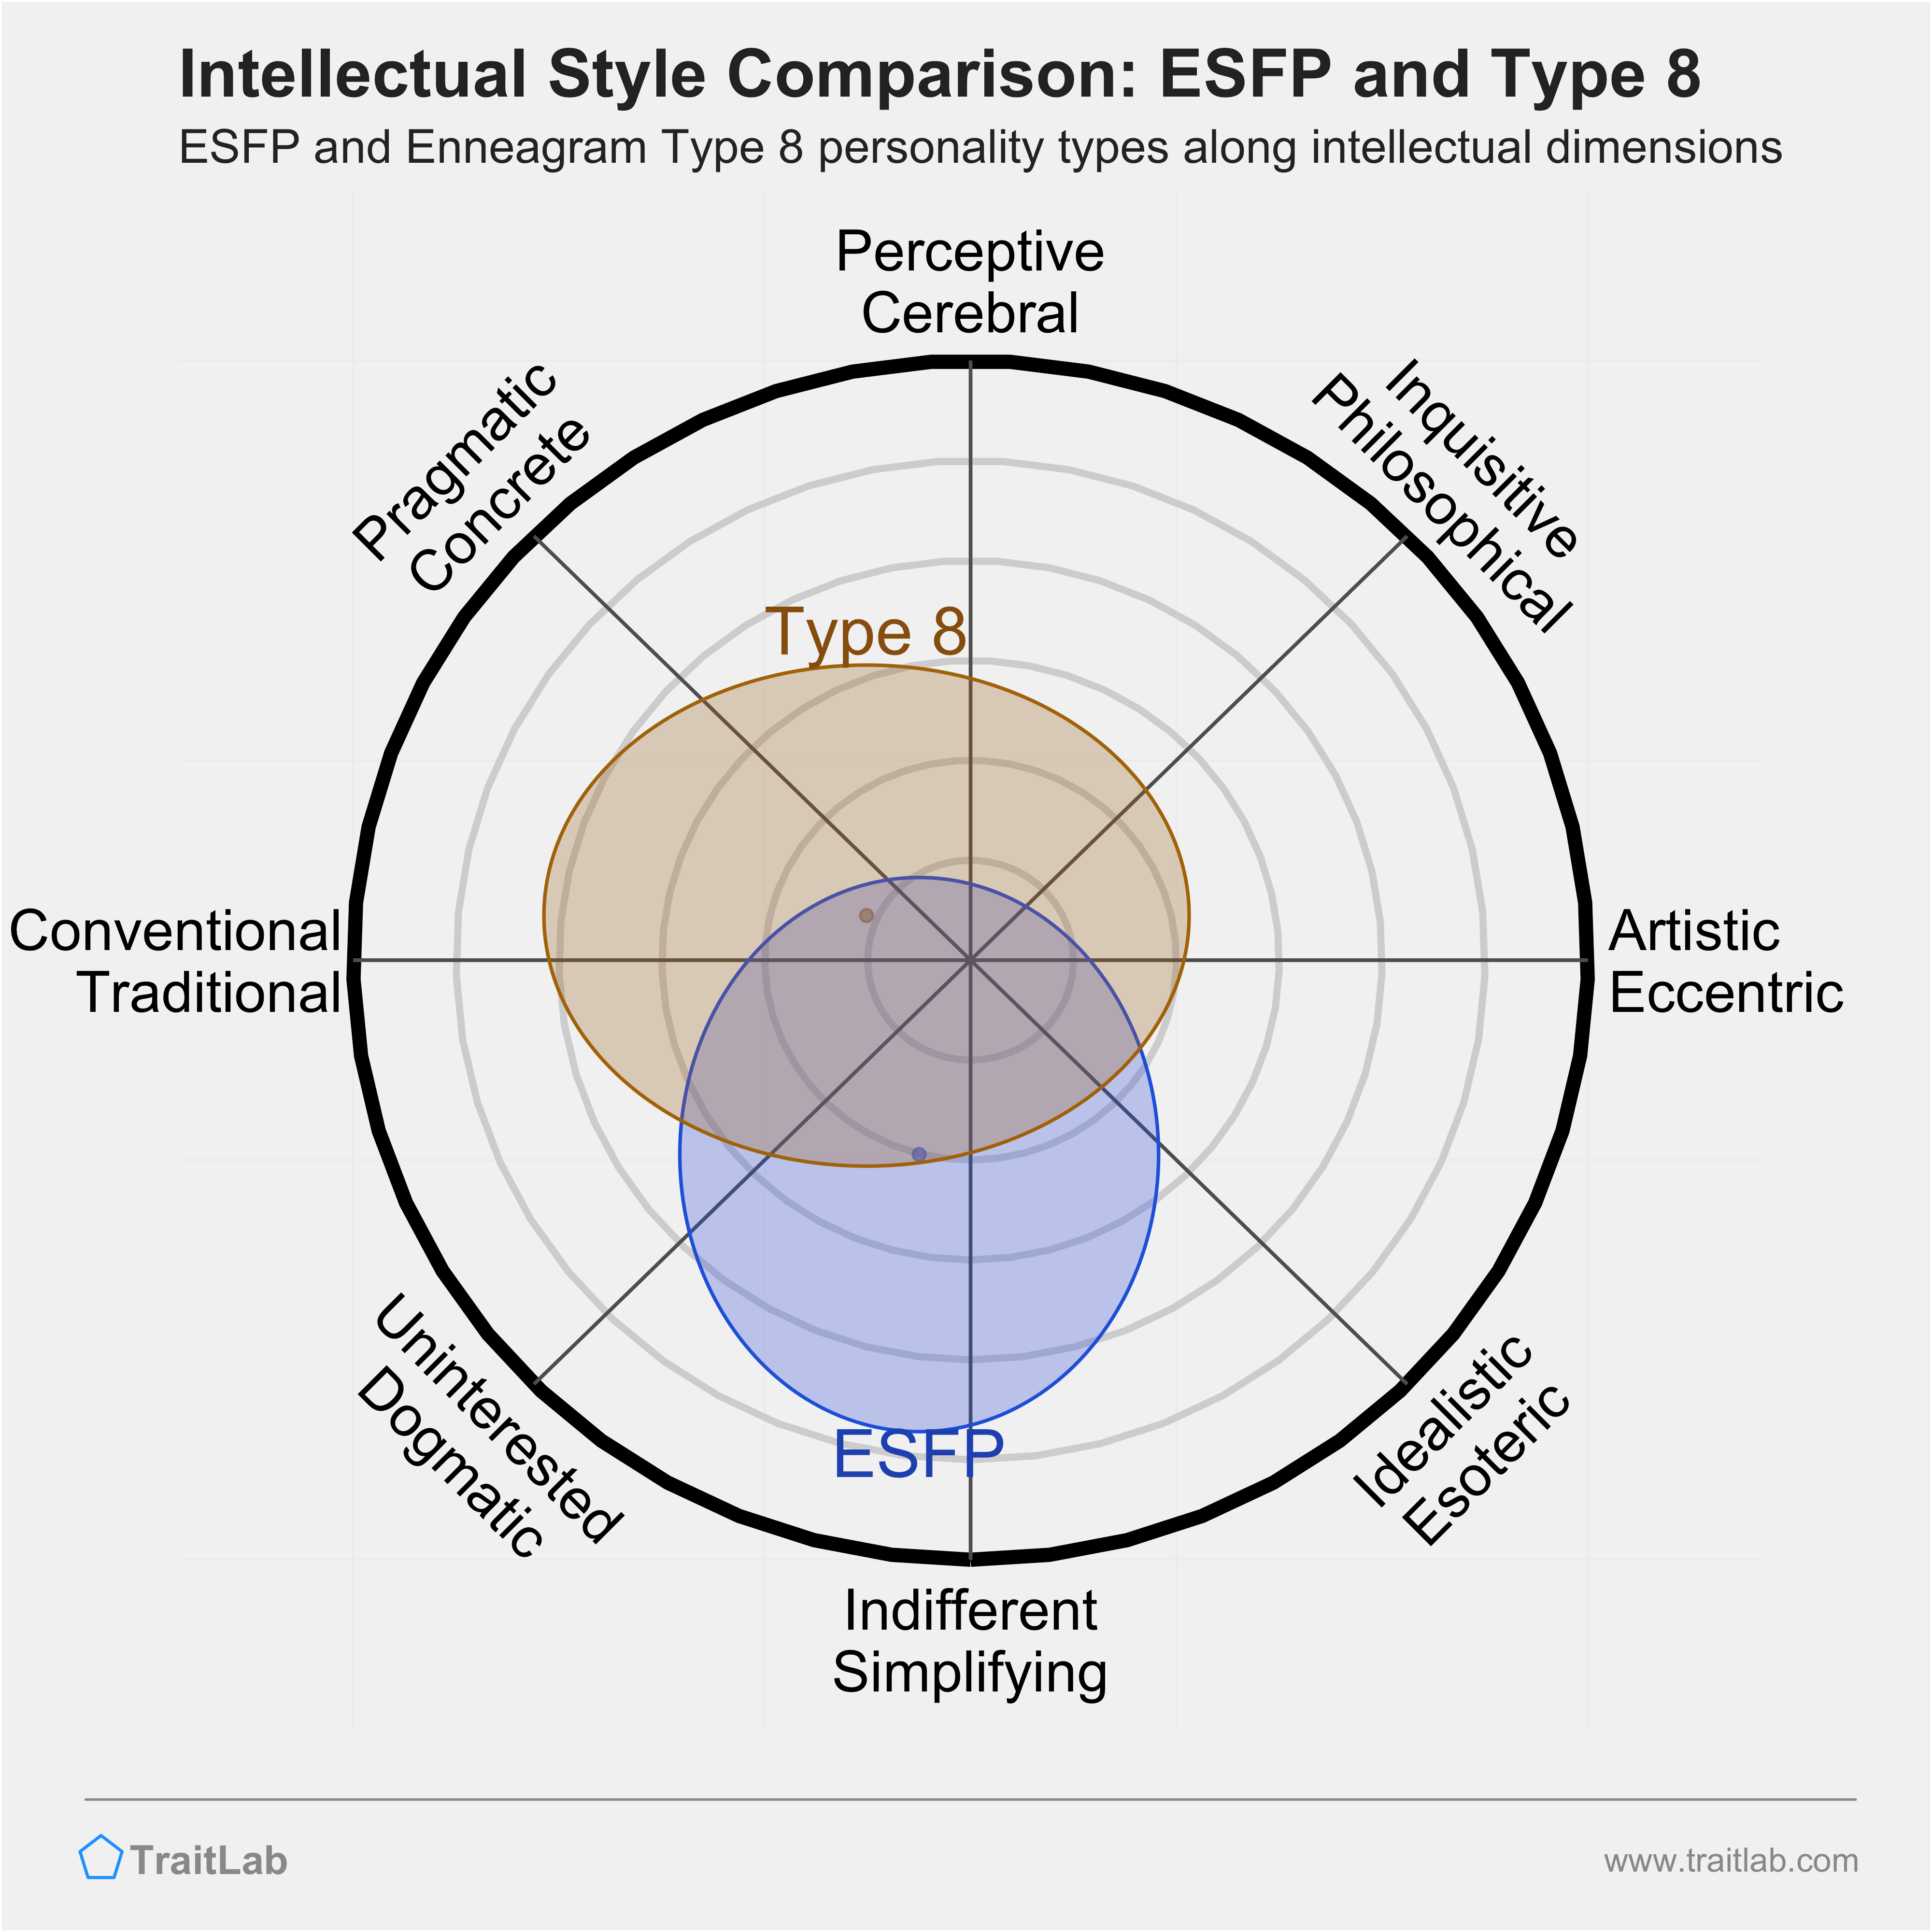 ESFP and Type 8 comparison across intellectual dimensions